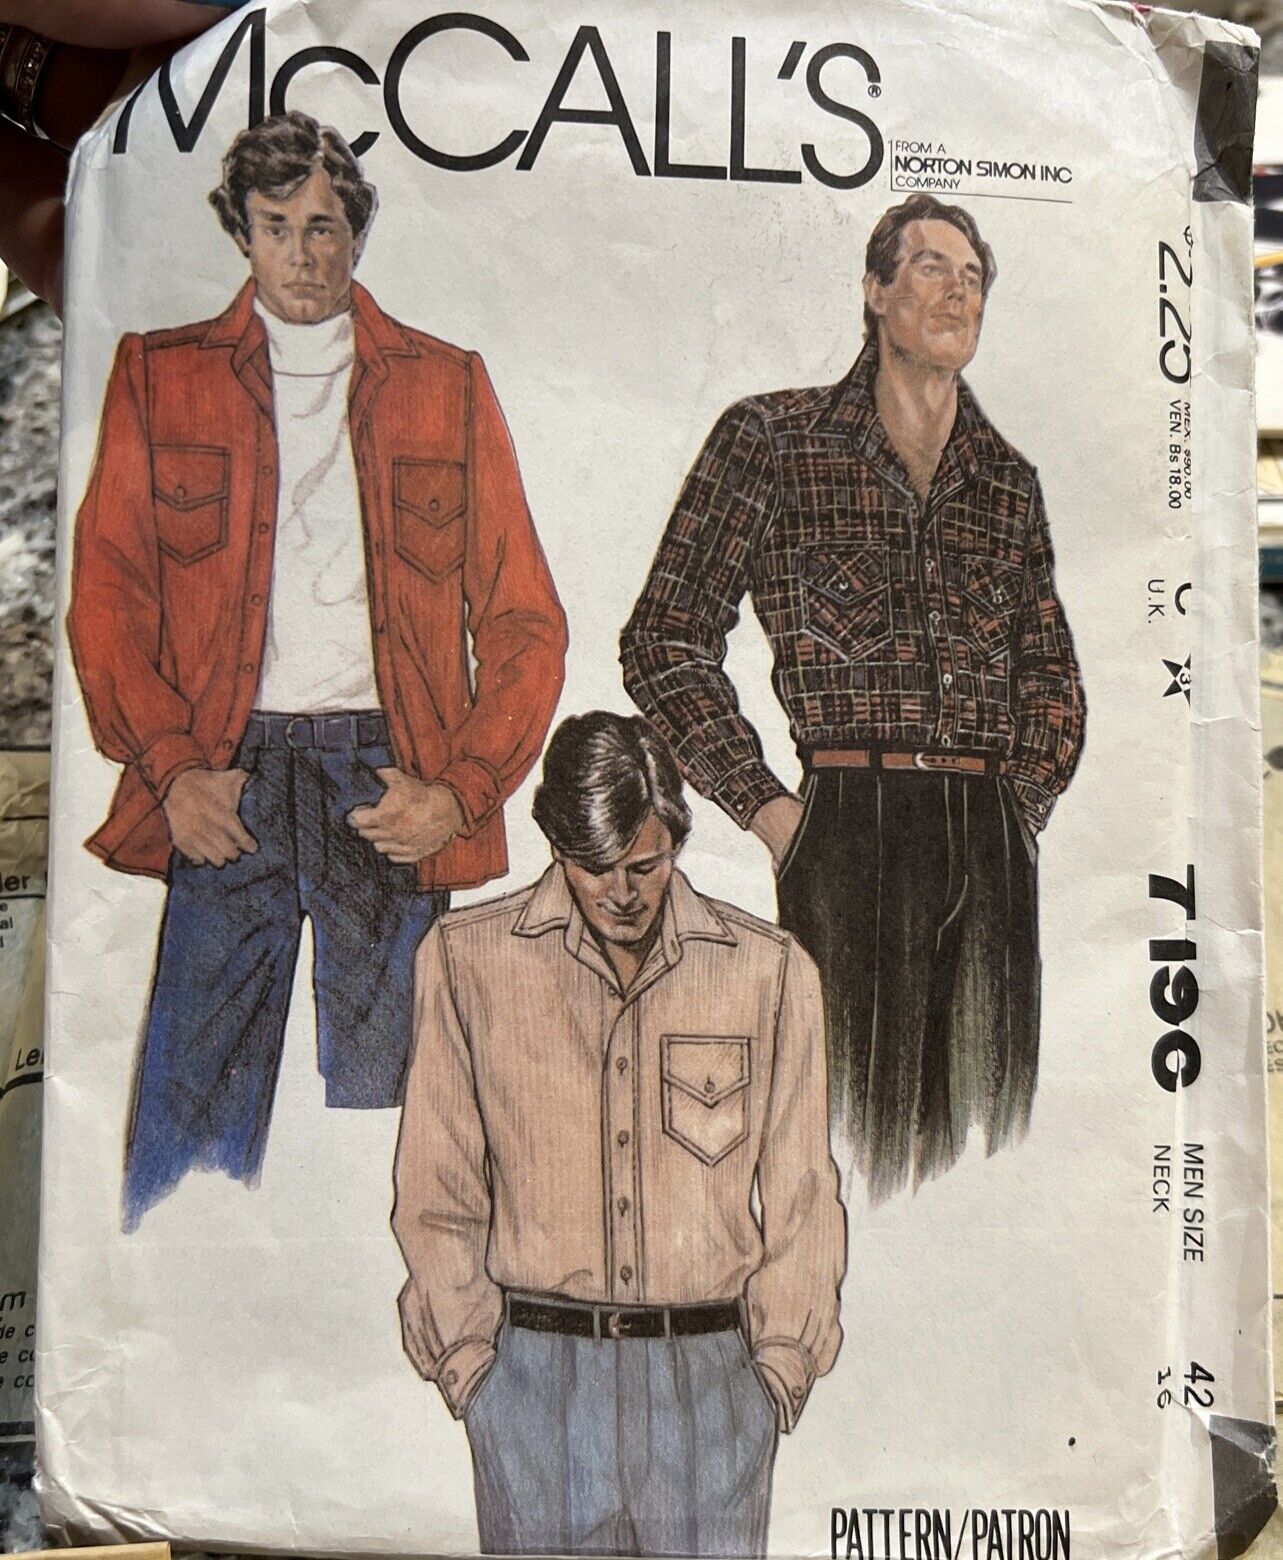 Vintage McCall’s Men’s sewing pattern #7196 top-stitched shirt Sz 42 Neck 16